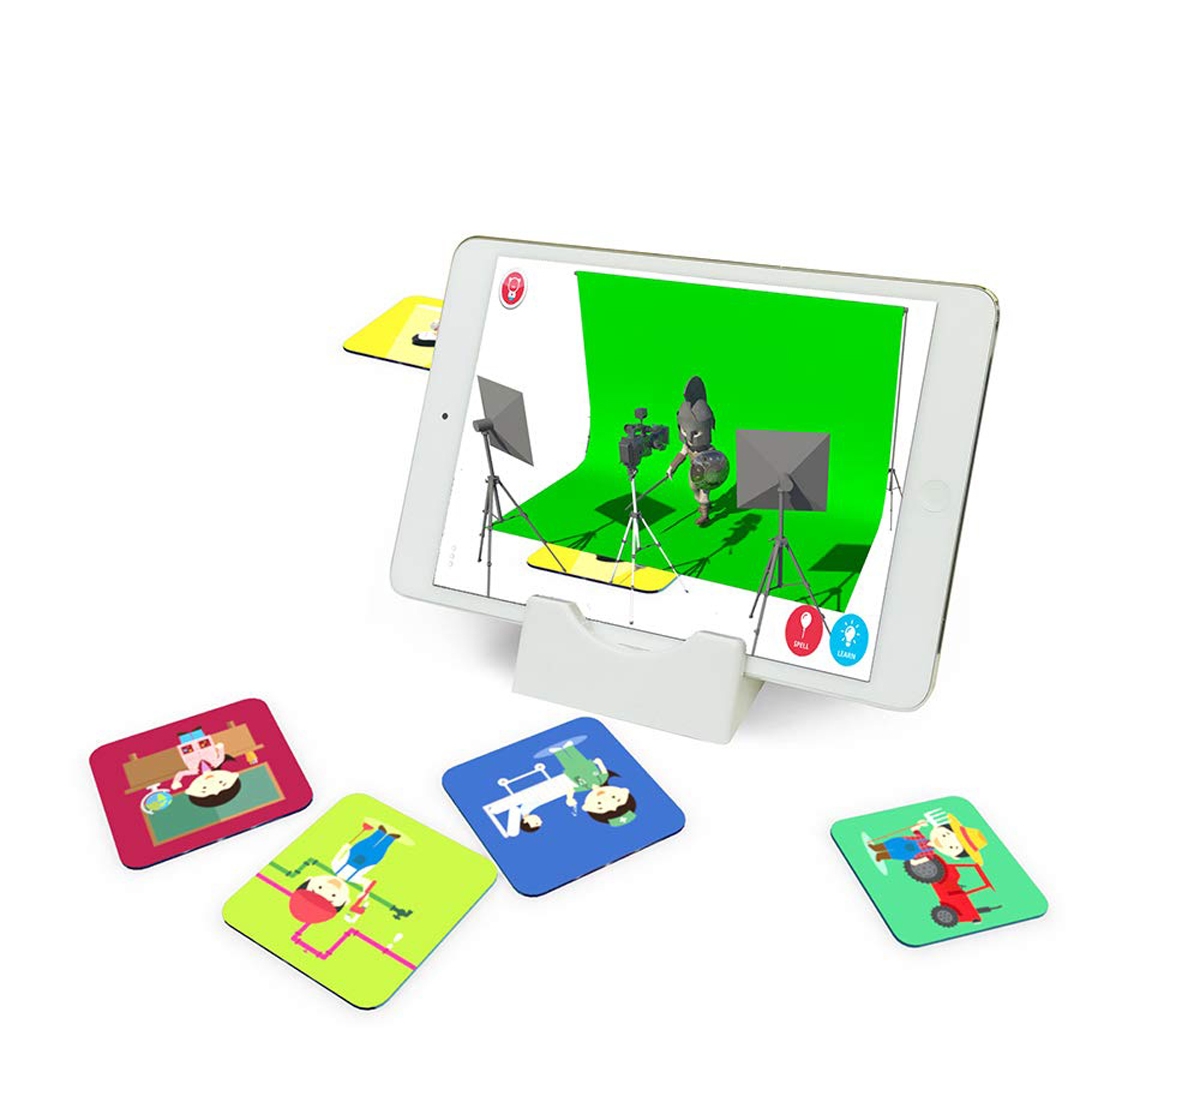 Playshifu | Playshifu Shifu Galaxy with 20 Objects in 3D  Augmented Reality game  Augmented Reality for Kids age 2Y+  3